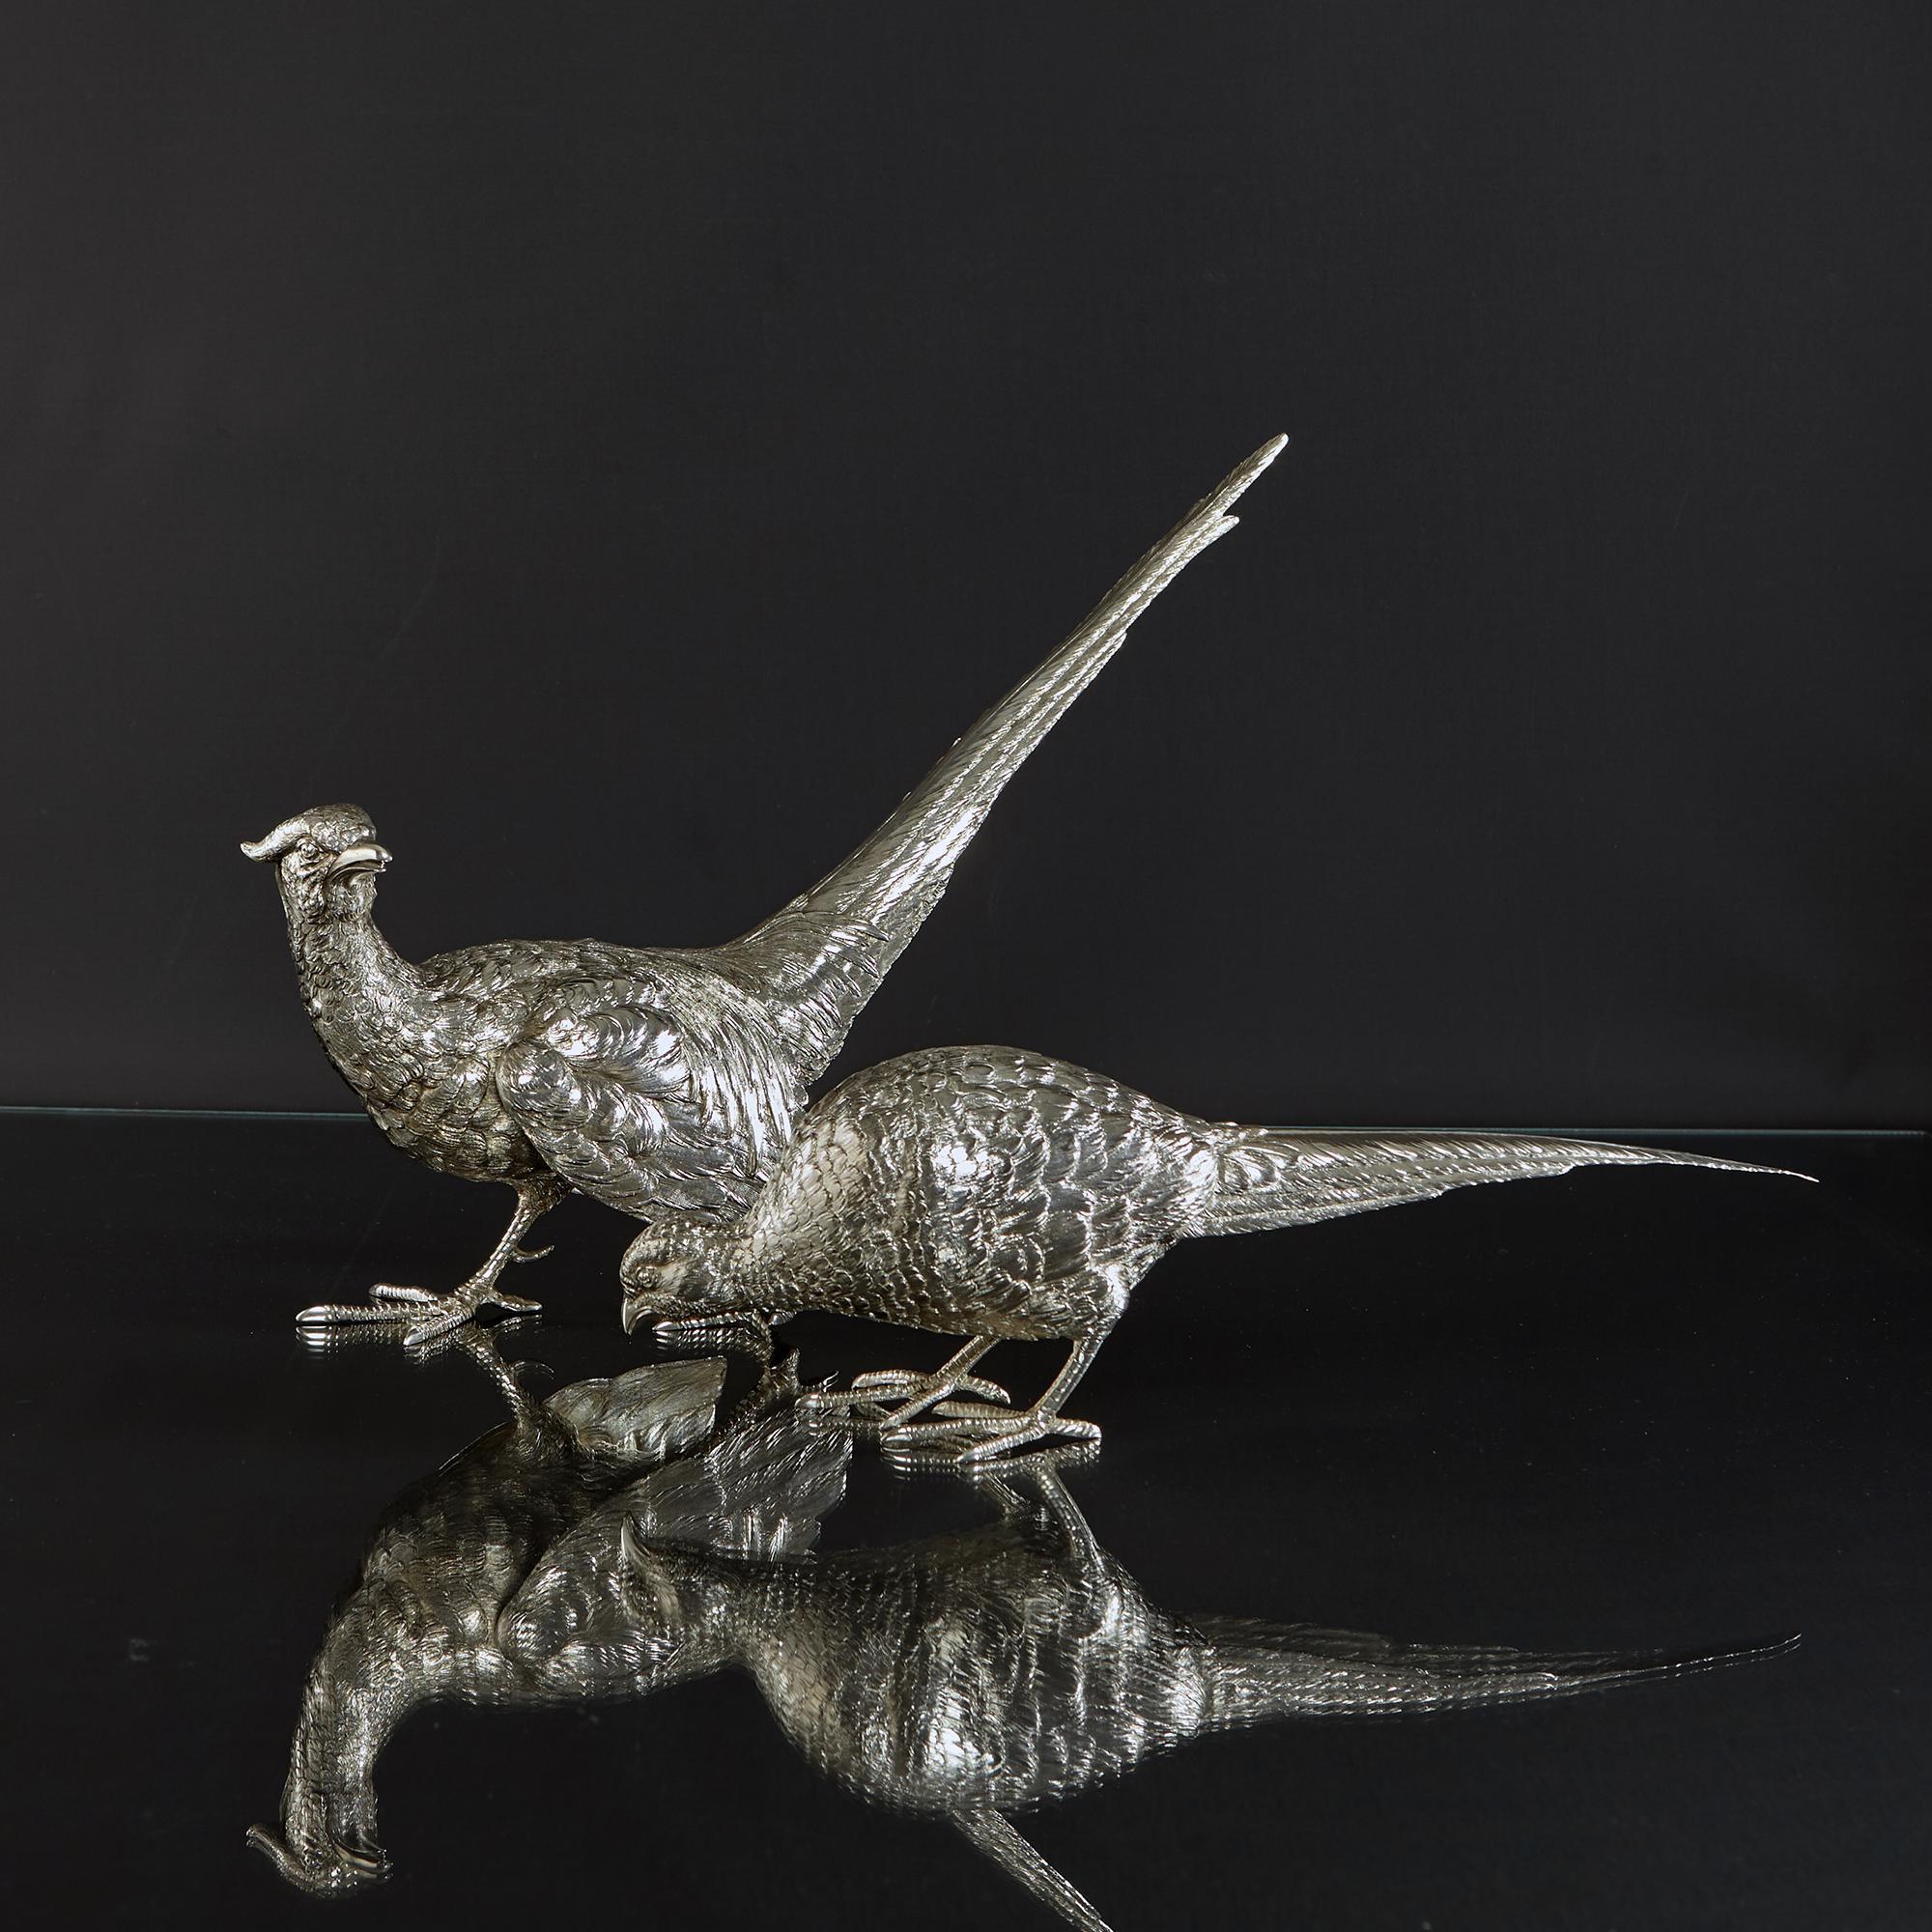 Pair of finely detailed model pheasants in 800 standard silver made in Italy circa 1950 and in excellent condition. Each silver pheasant is cast and hand-chased to give a lively and lifelike appearance standing in a courting pose. The male silver